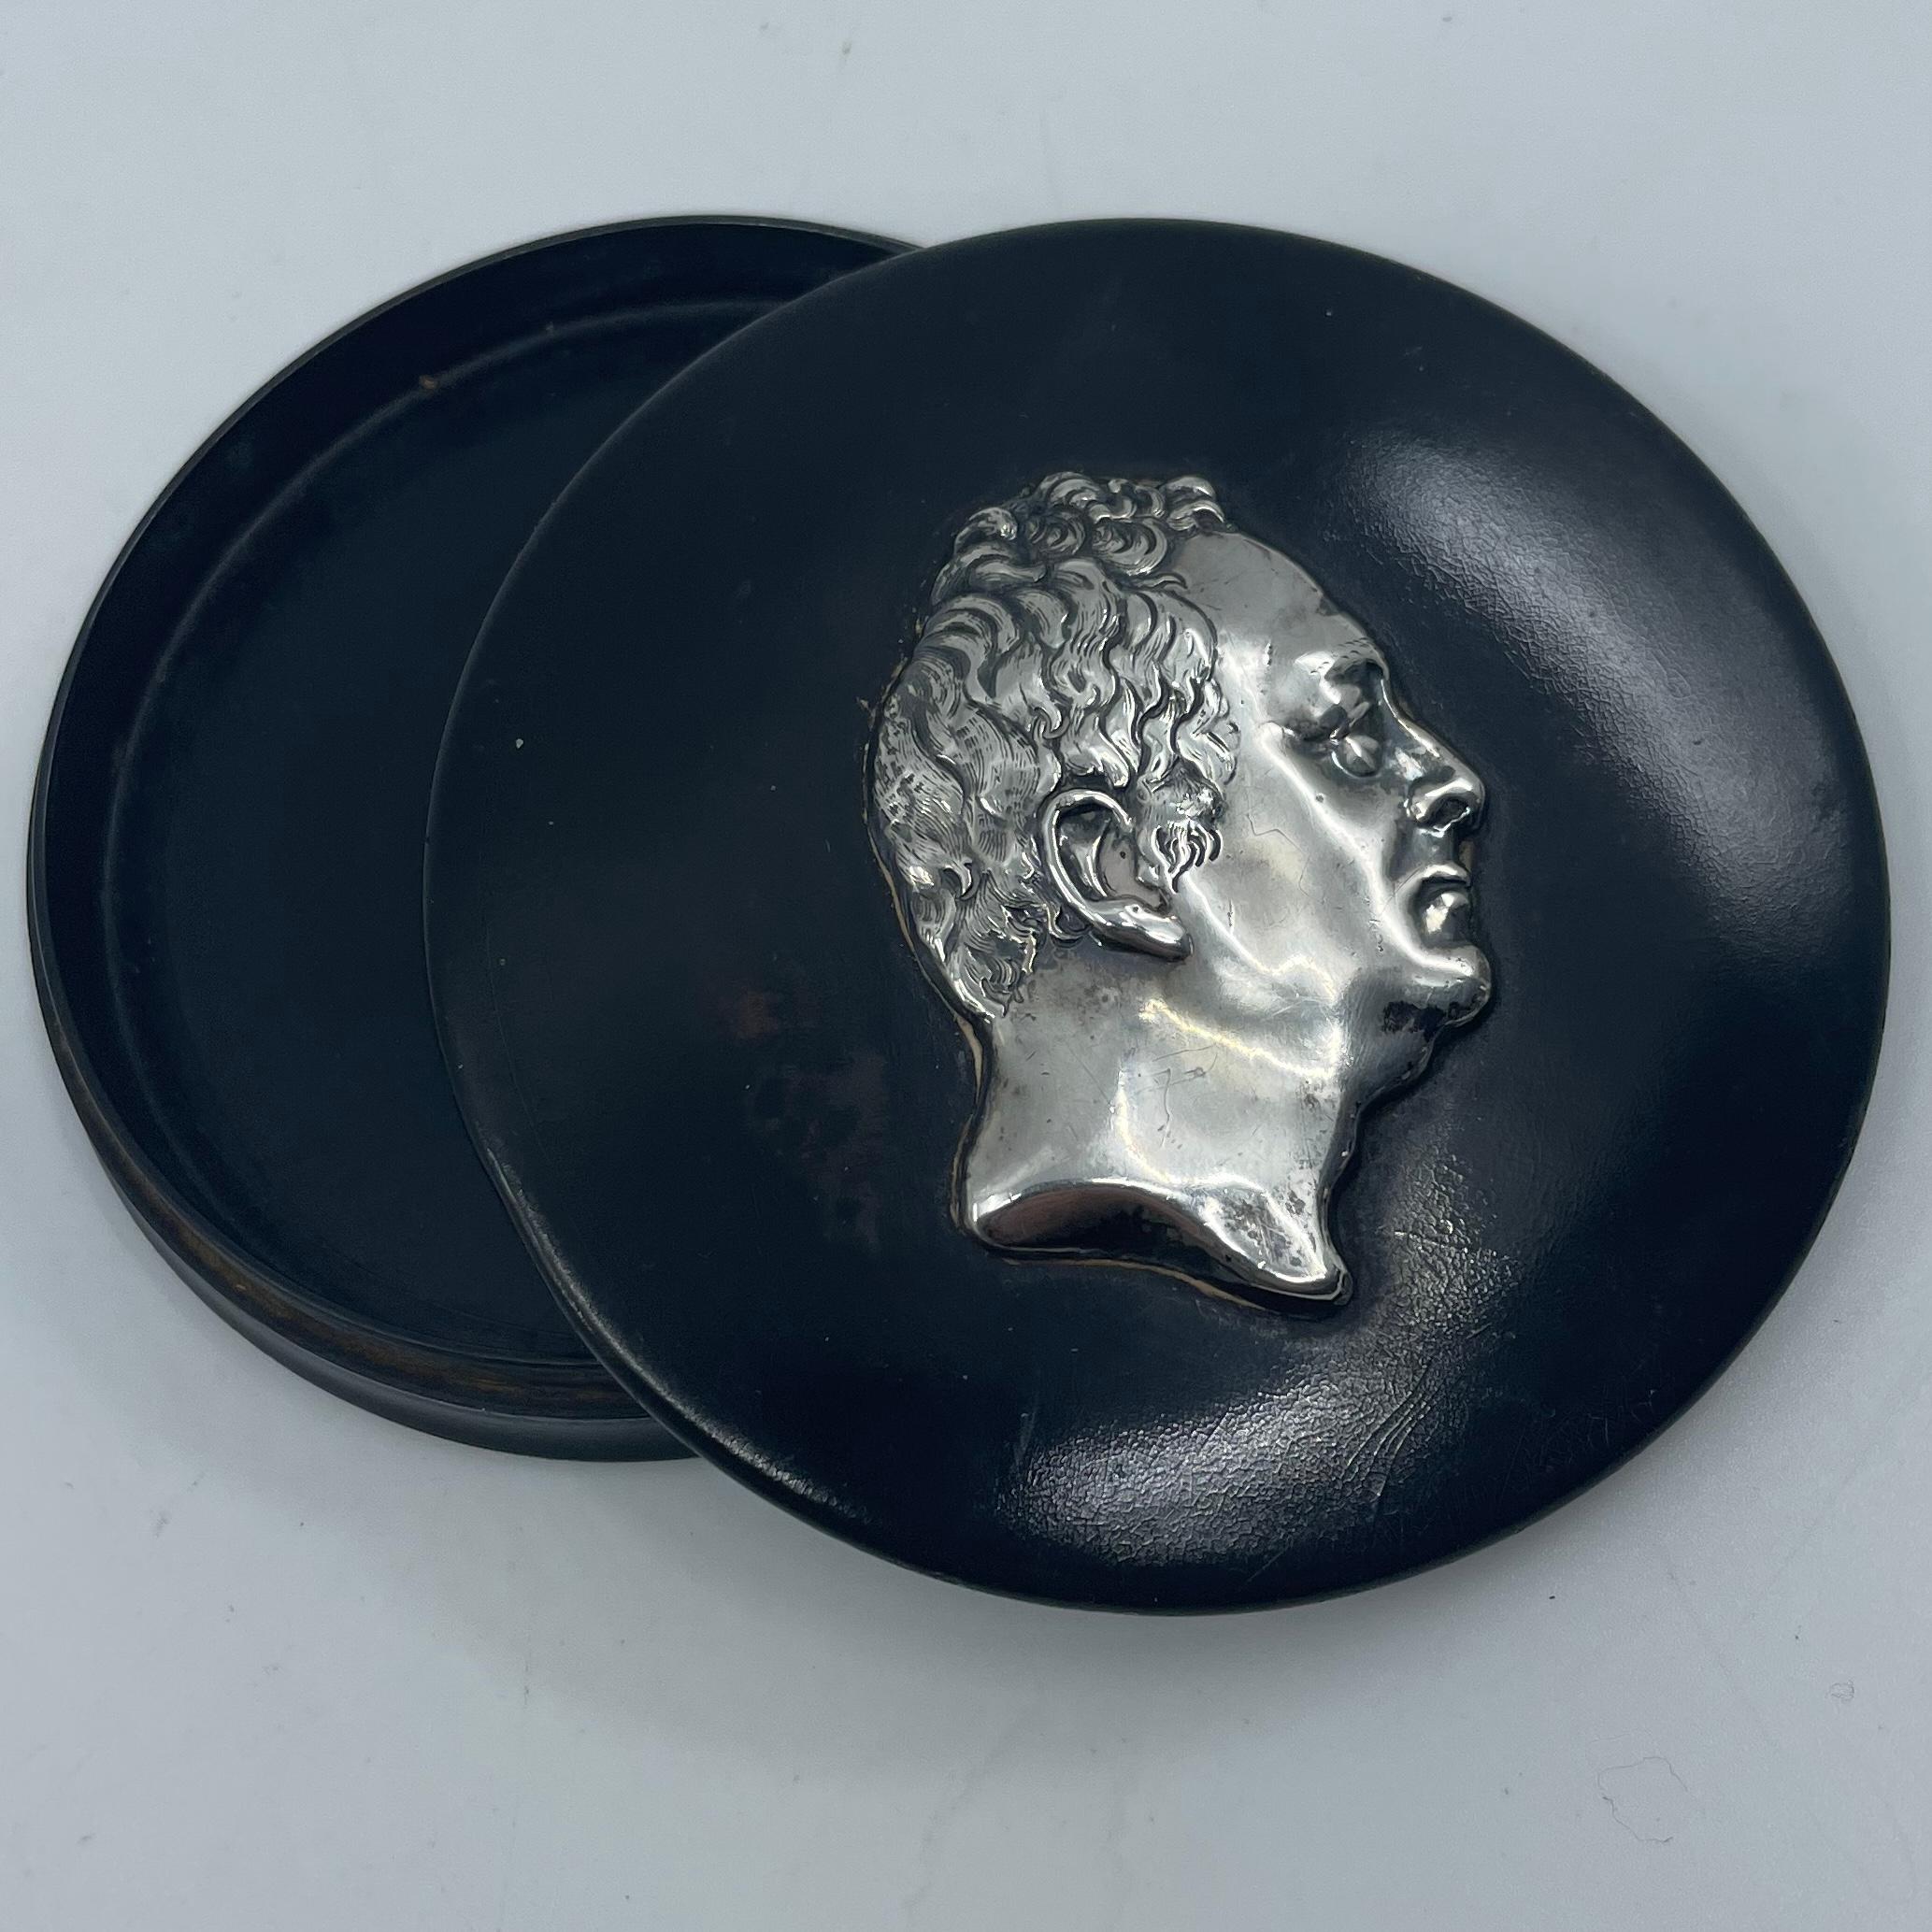 Duke of Clarence sterling silver snuff box. Antique ebonized wood and sterling silver box with the profile of the son of Queen Victoria. England, late 19th century. 
Dimensions: 3.5” diameter x .75